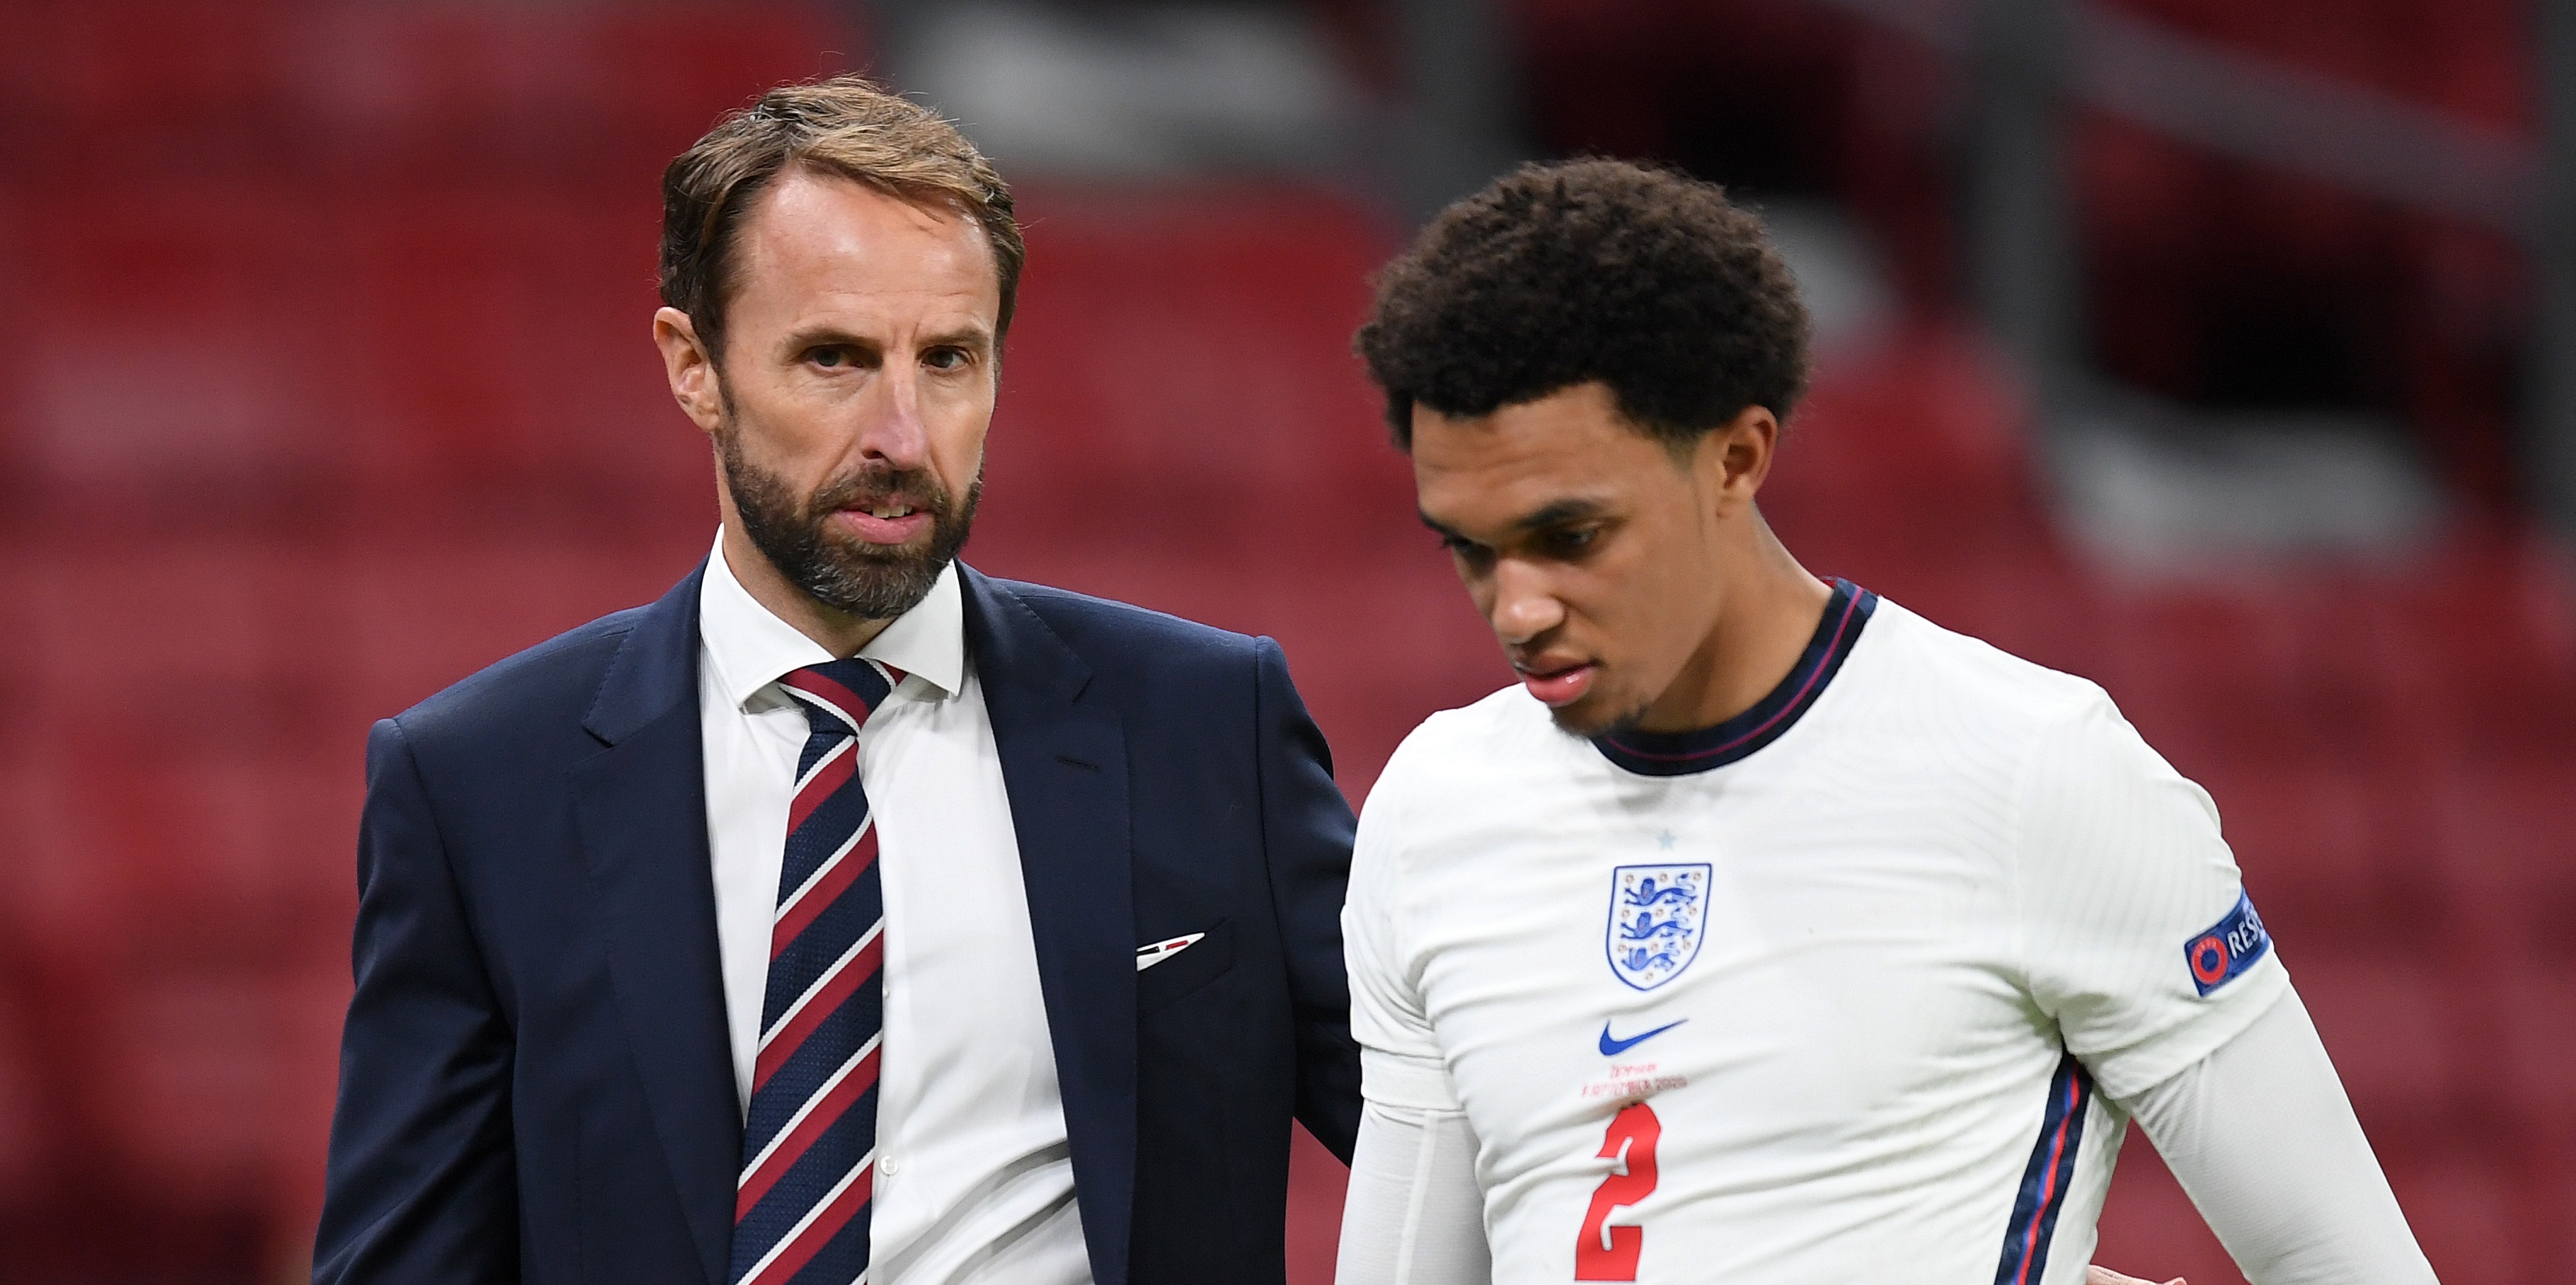 ‘Ridiculous to me’ – Athletic writer left baffled by Southgate’s ‘bizarre’ treatment of Trent Alexander-Arnold